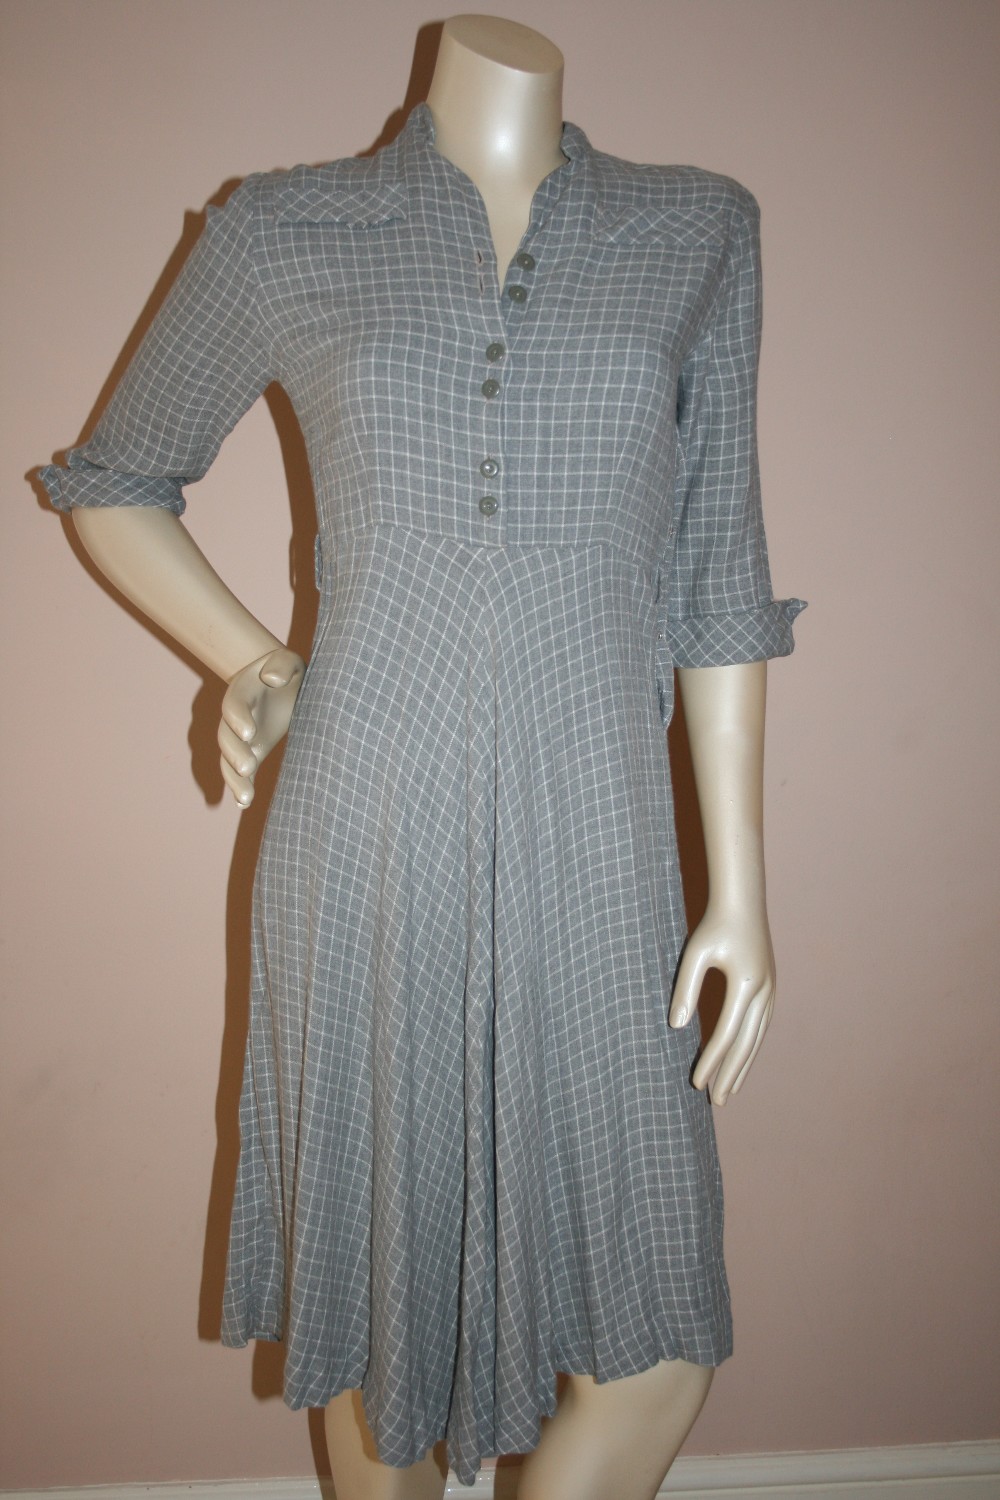 Two 1940s dresses: one soft brushed cotton silver grey with white check having button through